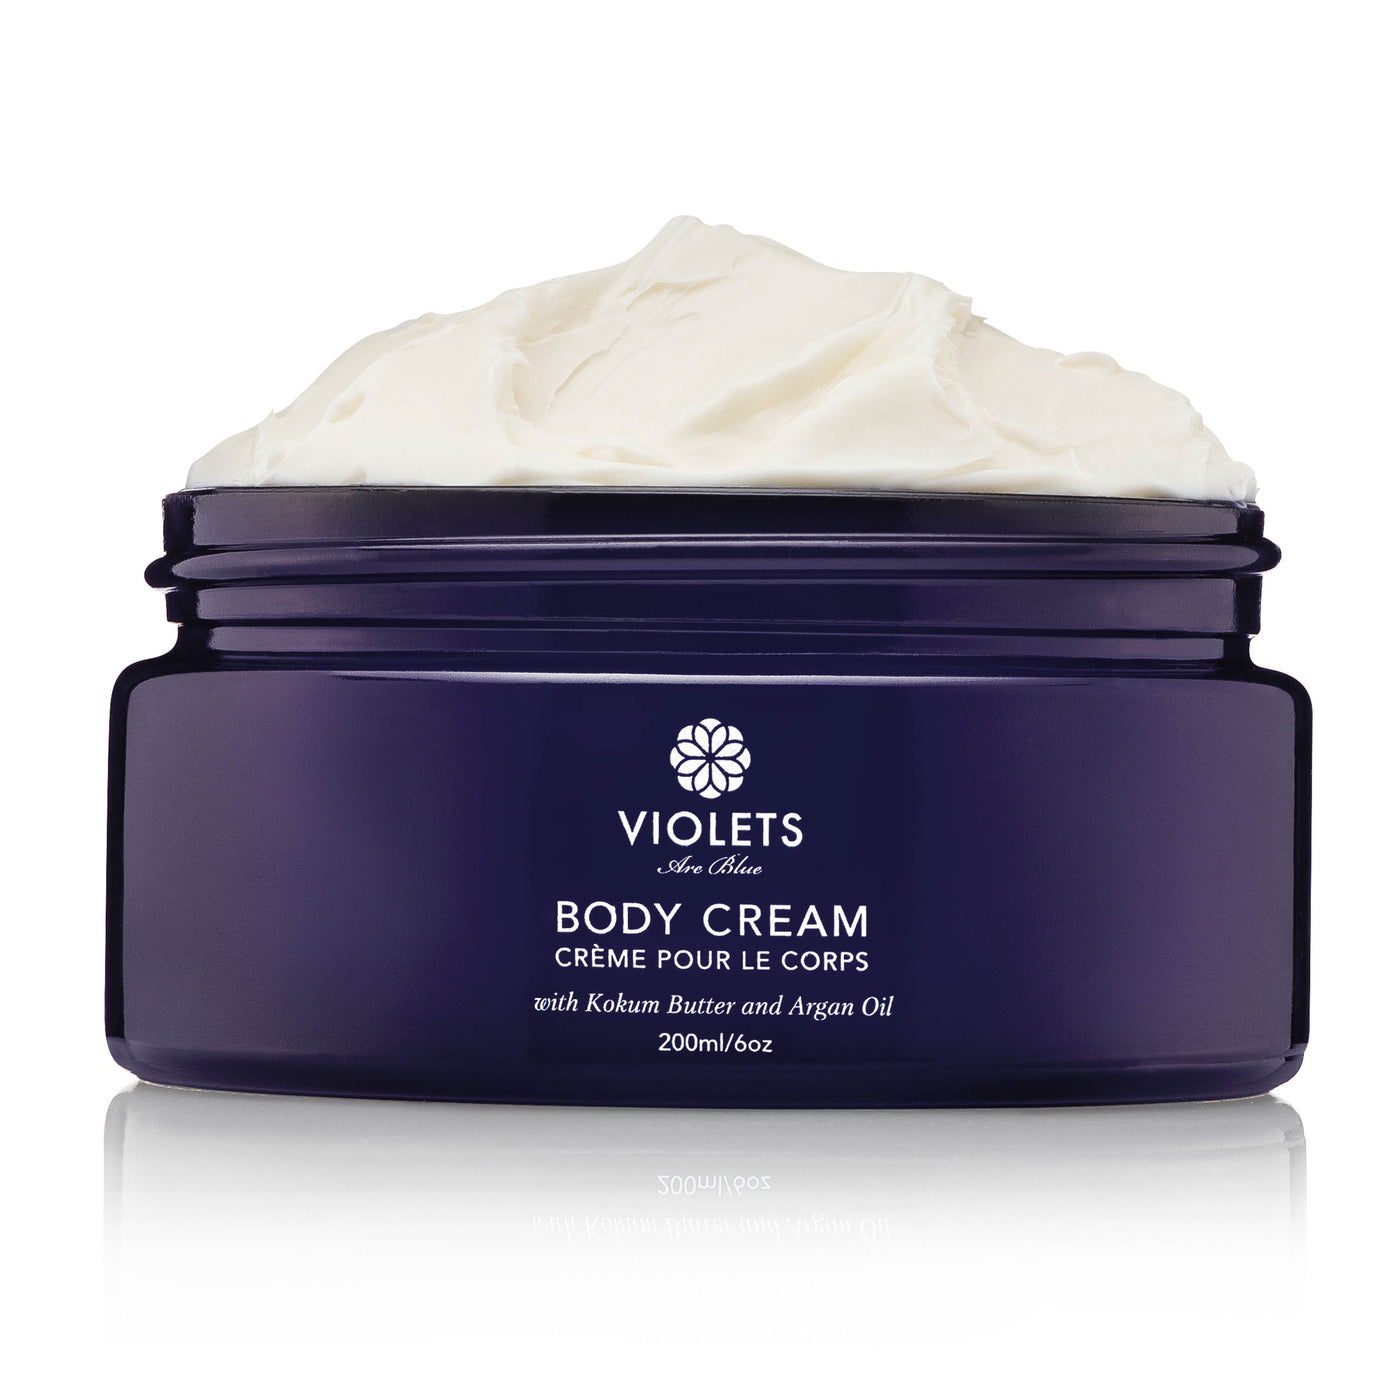 Body Cream with Kokum Butter and Argan Oil - 6 oz